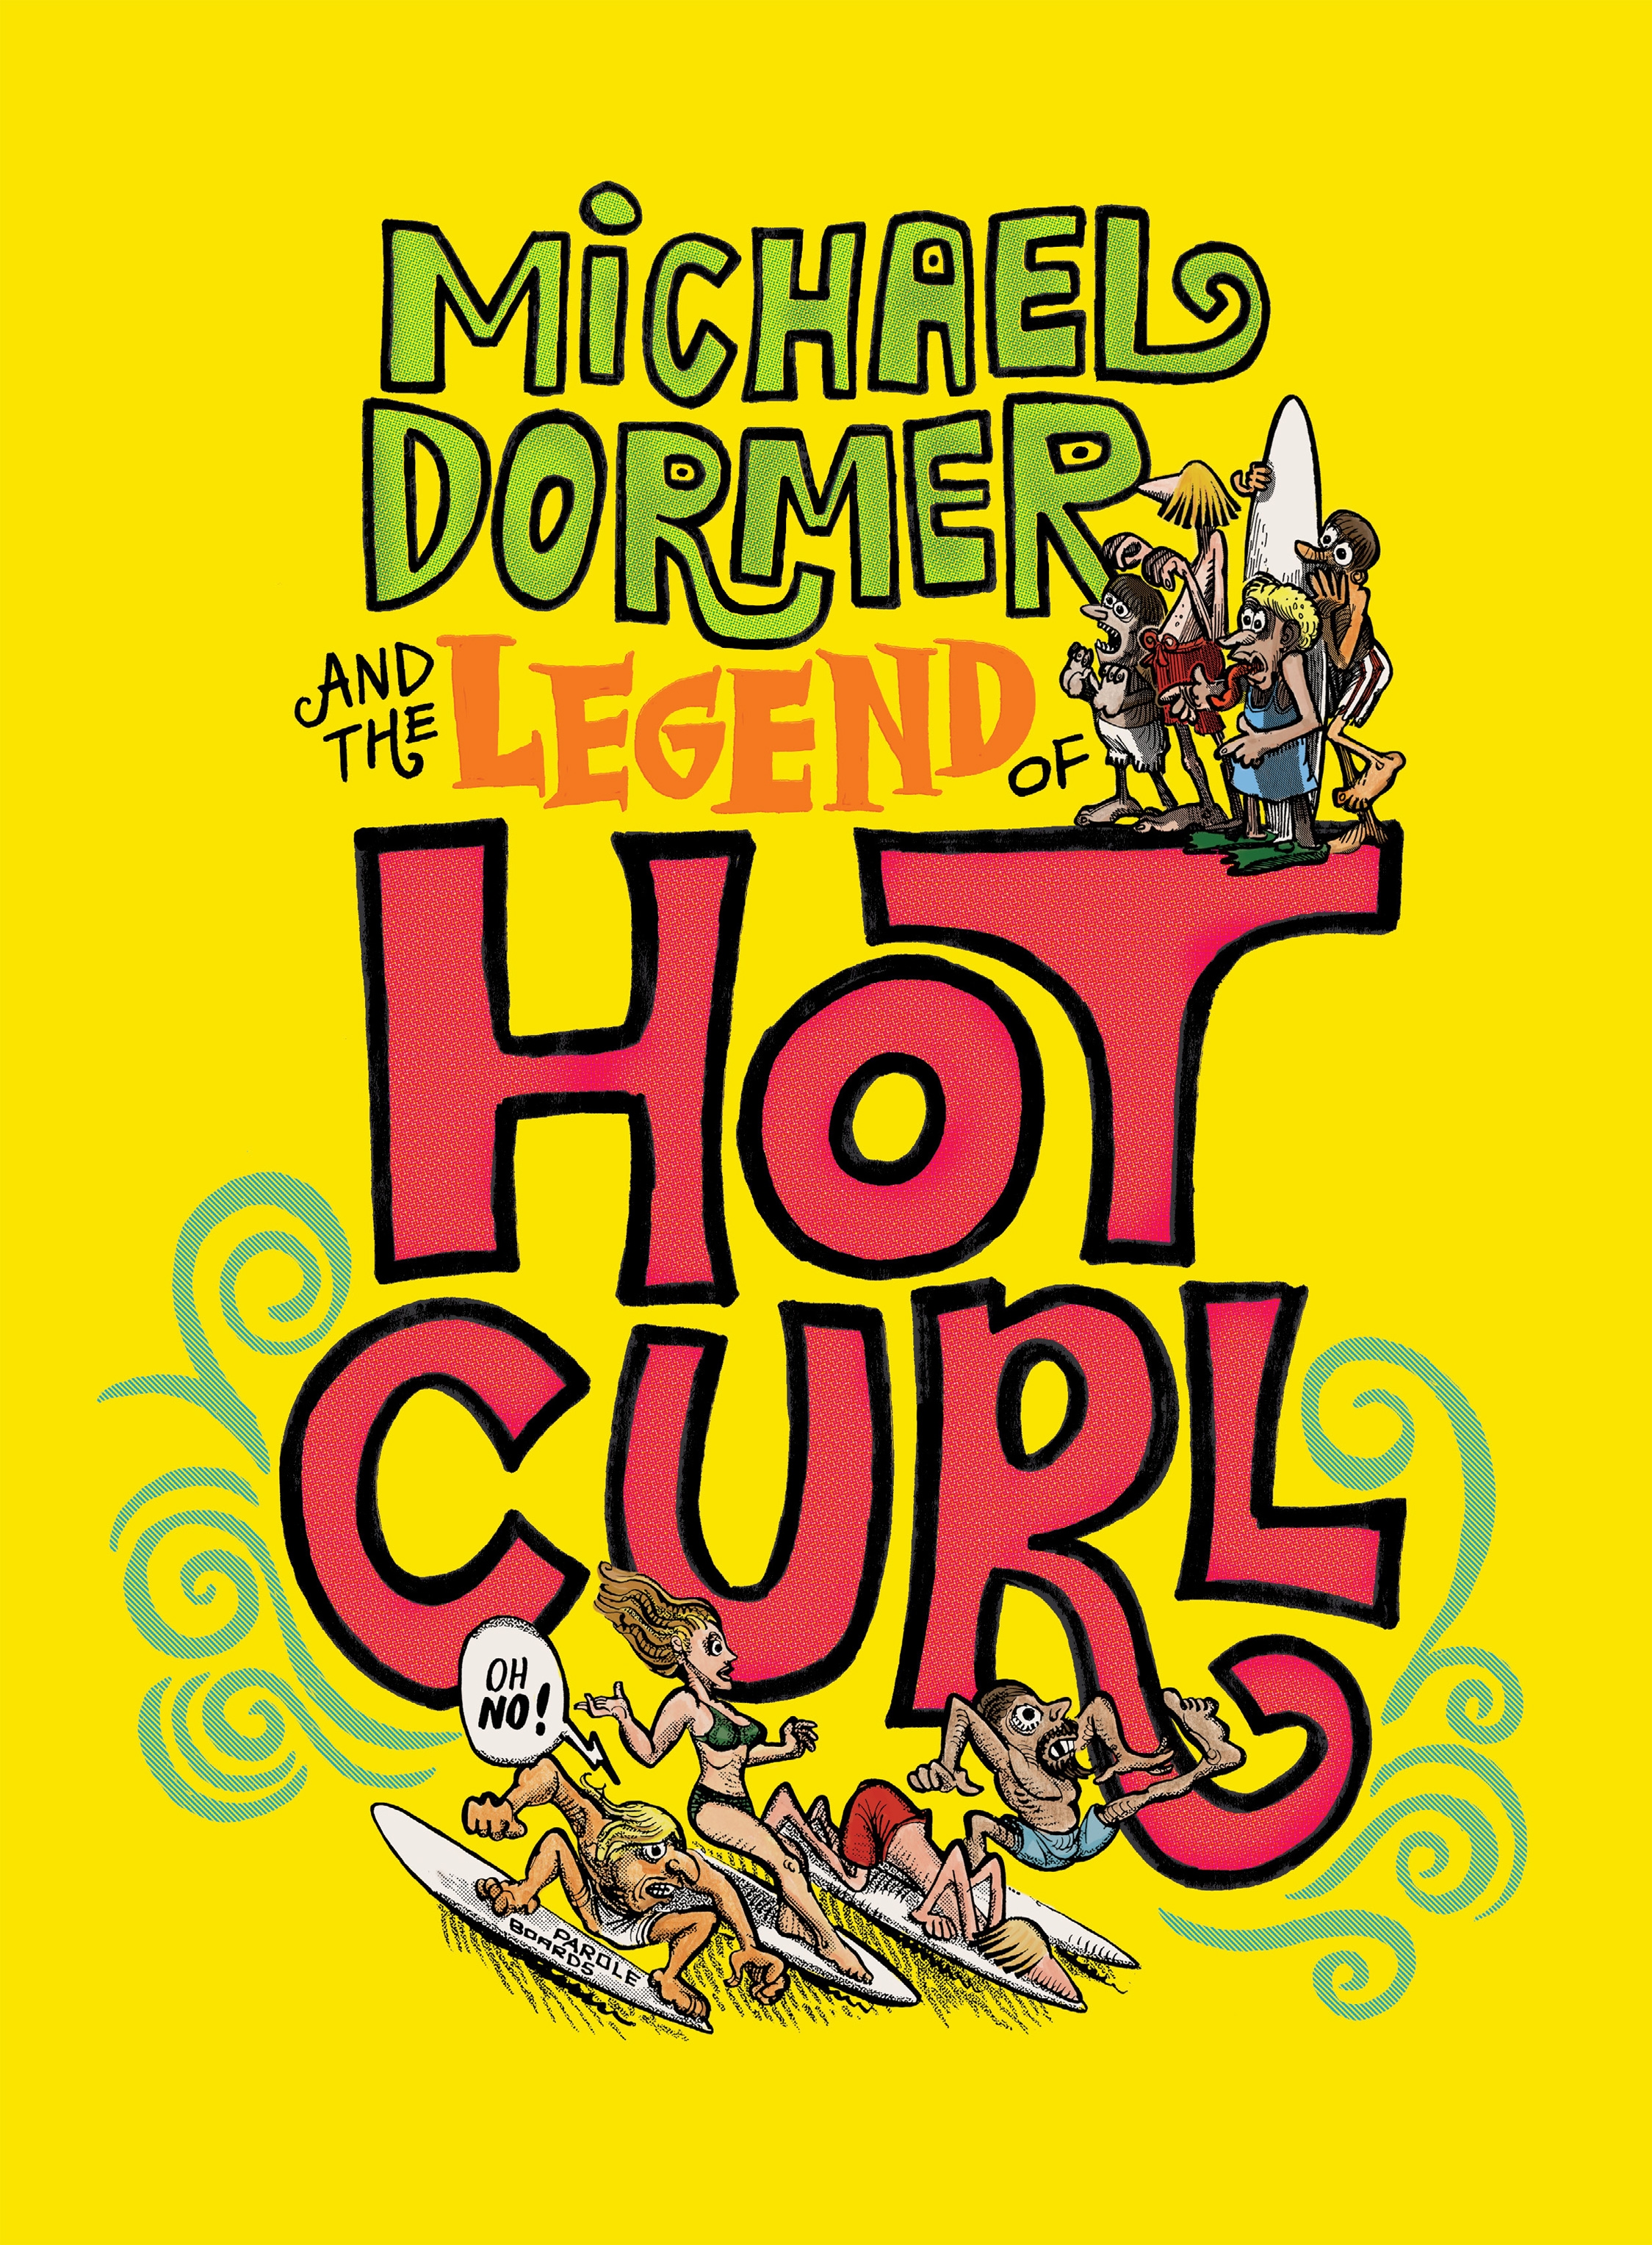 Read online Michael Dormer and the Legend of Hot Curl comic -  Issue # TPB (Part 1) - 1